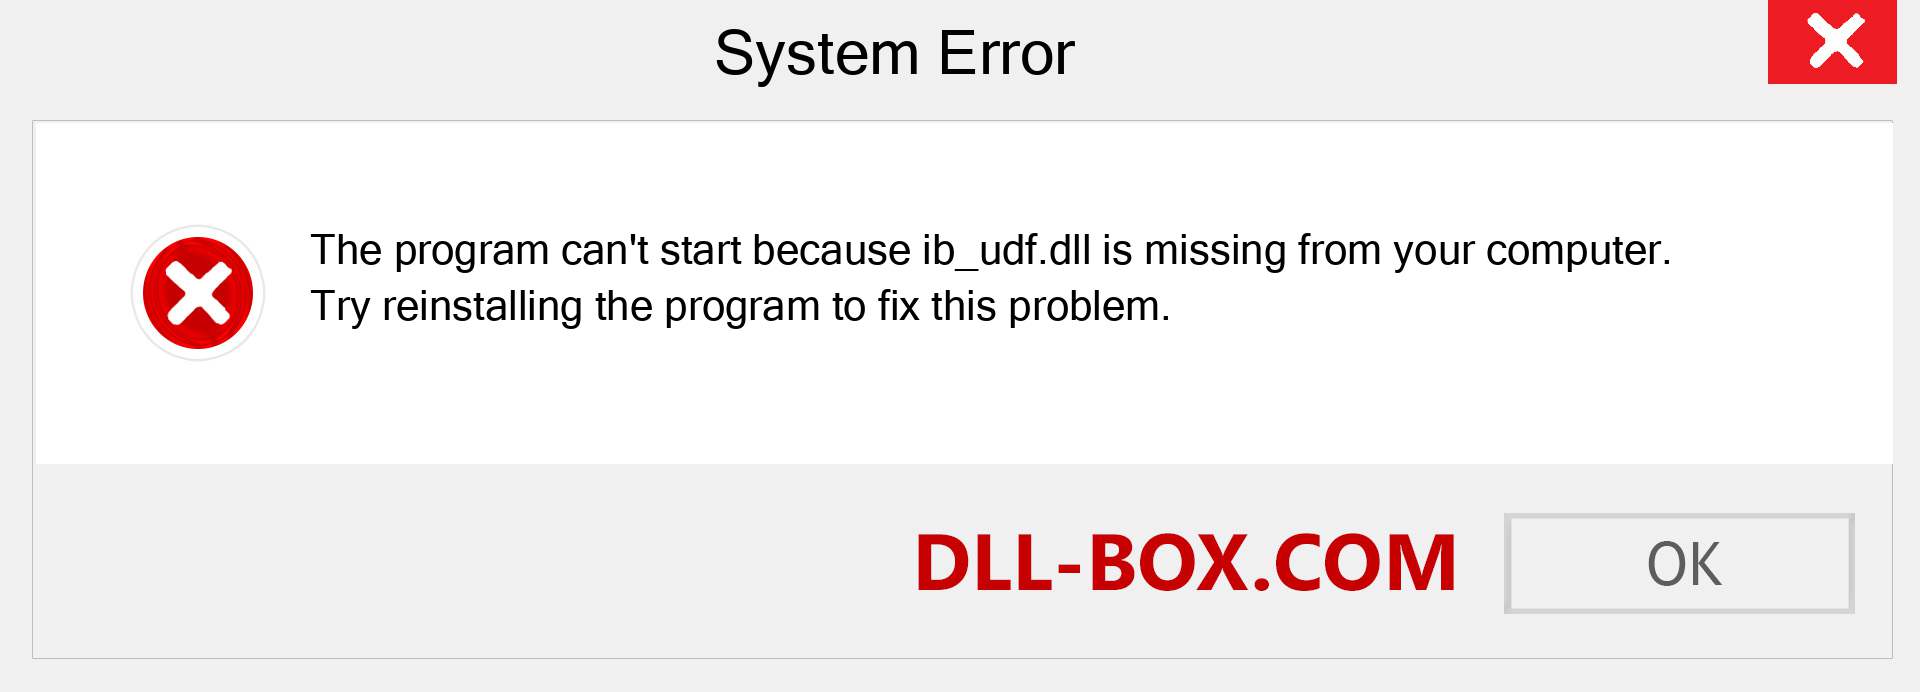  ib_udf.dll file is missing?. Download for Windows 7, 8, 10 - Fix  ib_udf dll Missing Error on Windows, photos, images